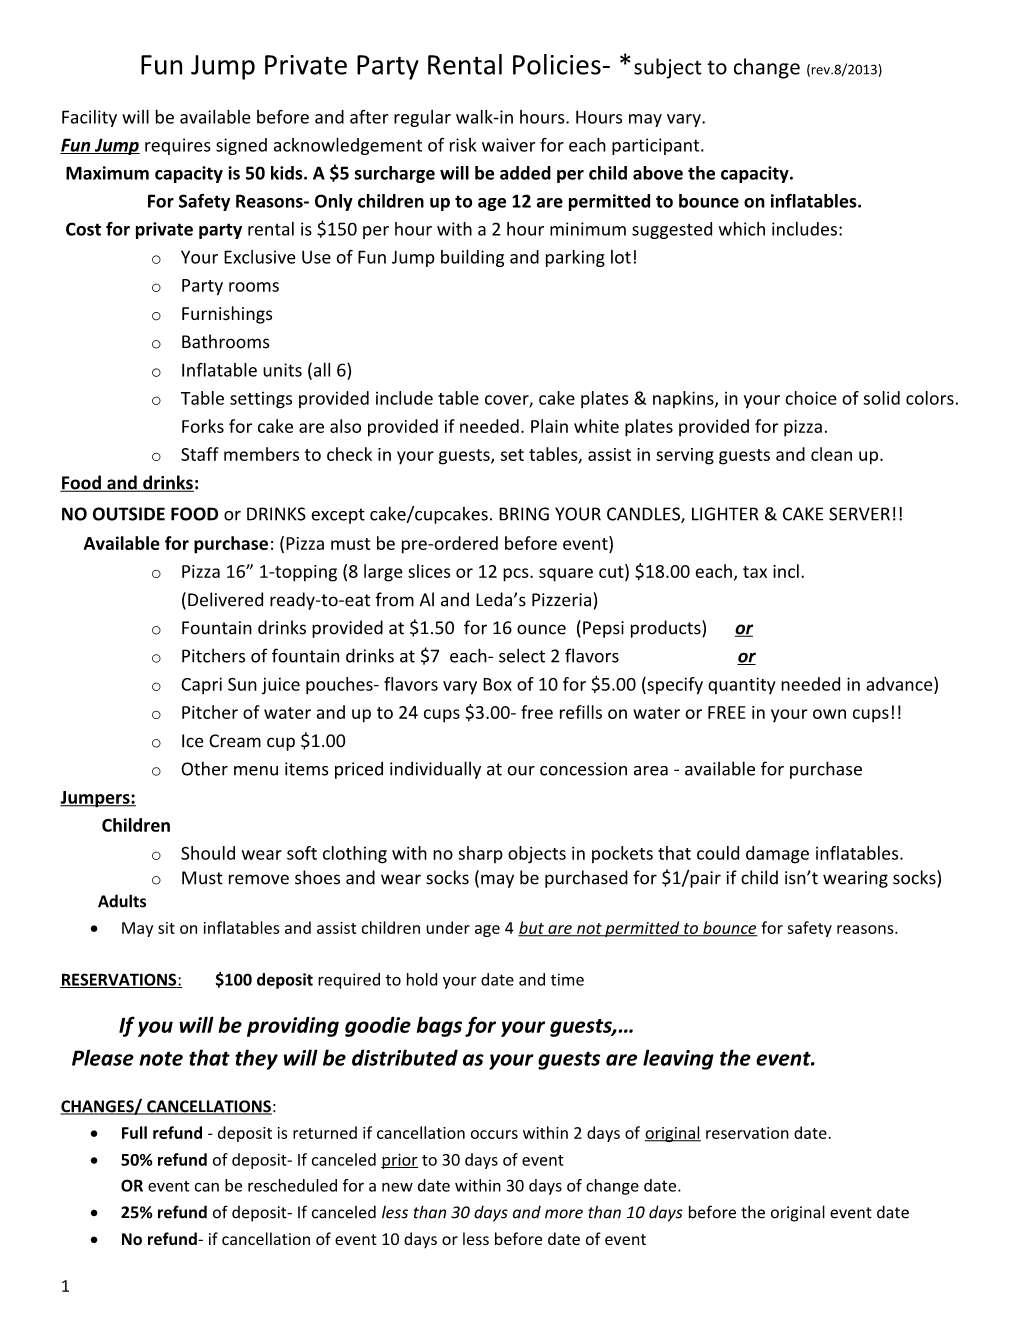 Fun Jump Private Party Rental Policies- *Subject to Change(Rev.8/2013)